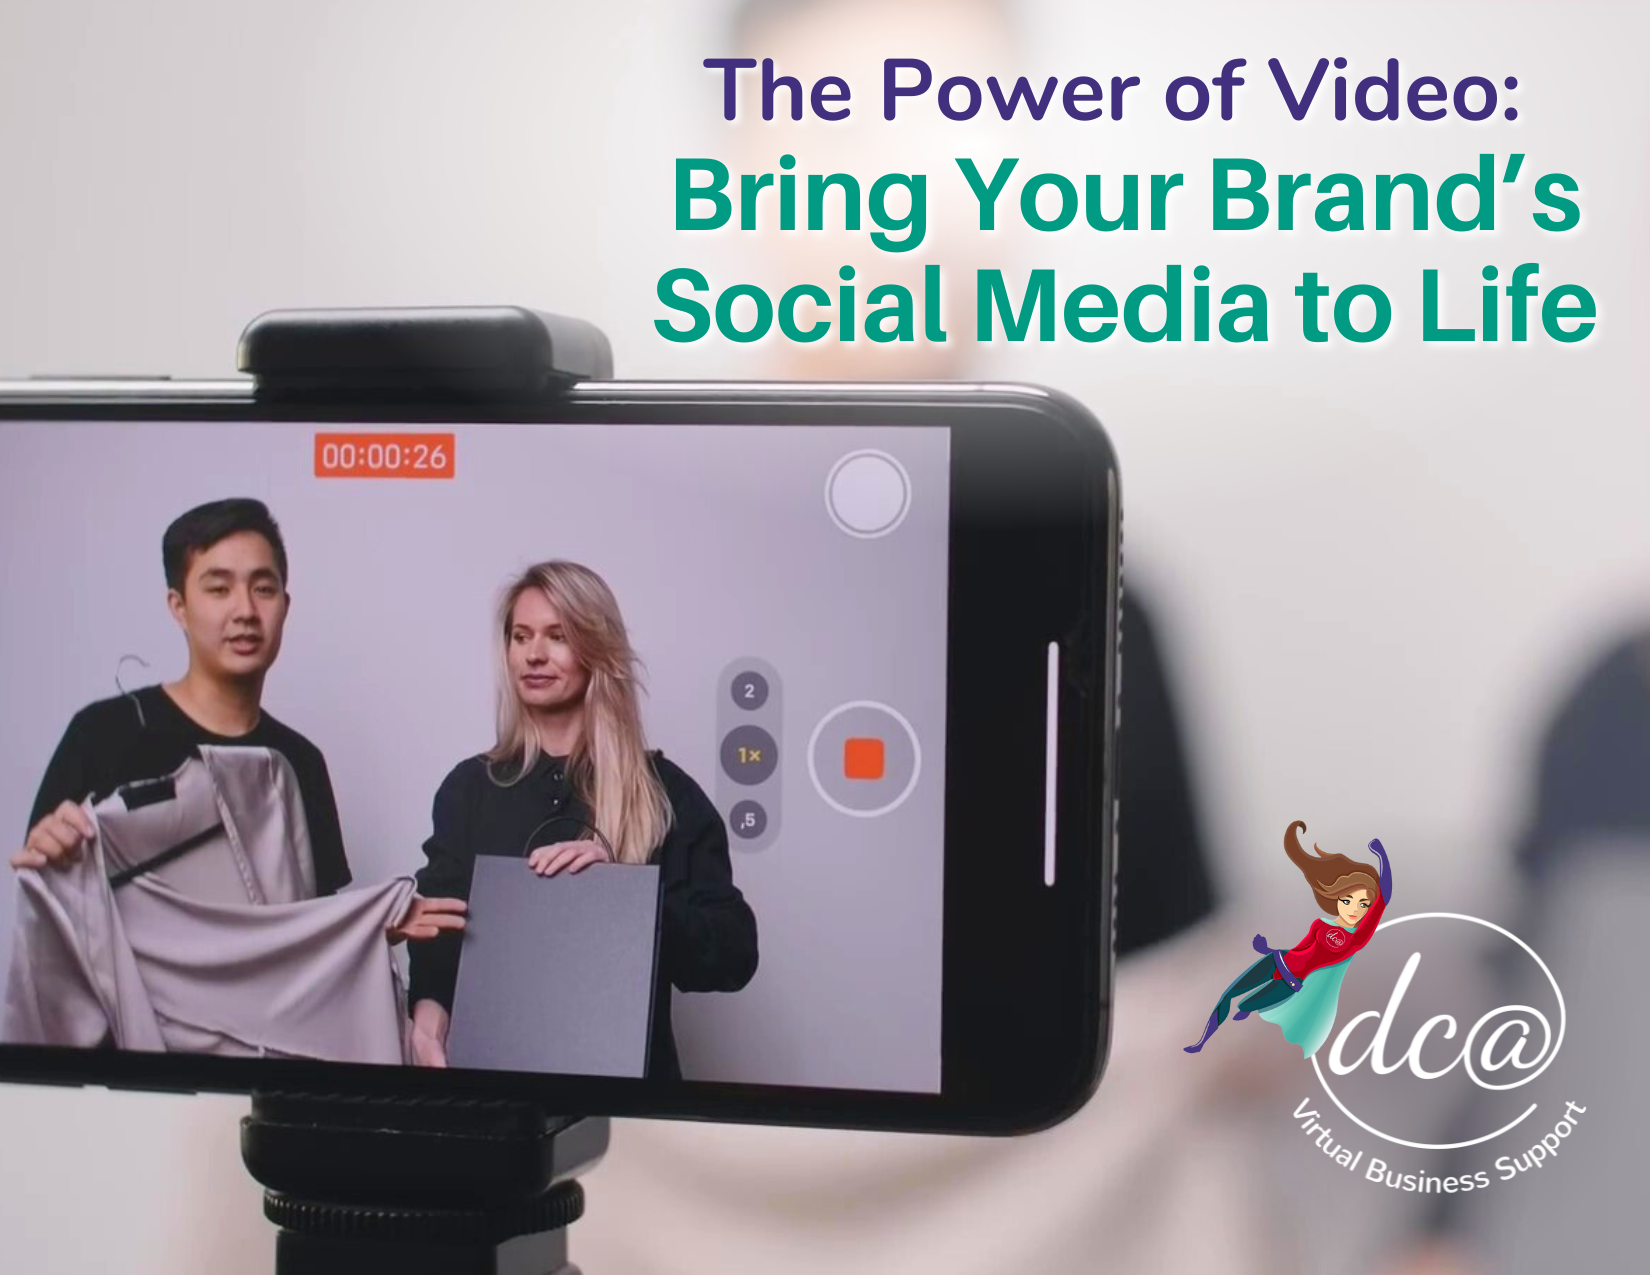 The Power of Video: Bring Your Brand’s Social Media to Life. Image of two people talking about products in front of a smart phone as it records them. DCA Virtual Business Support.